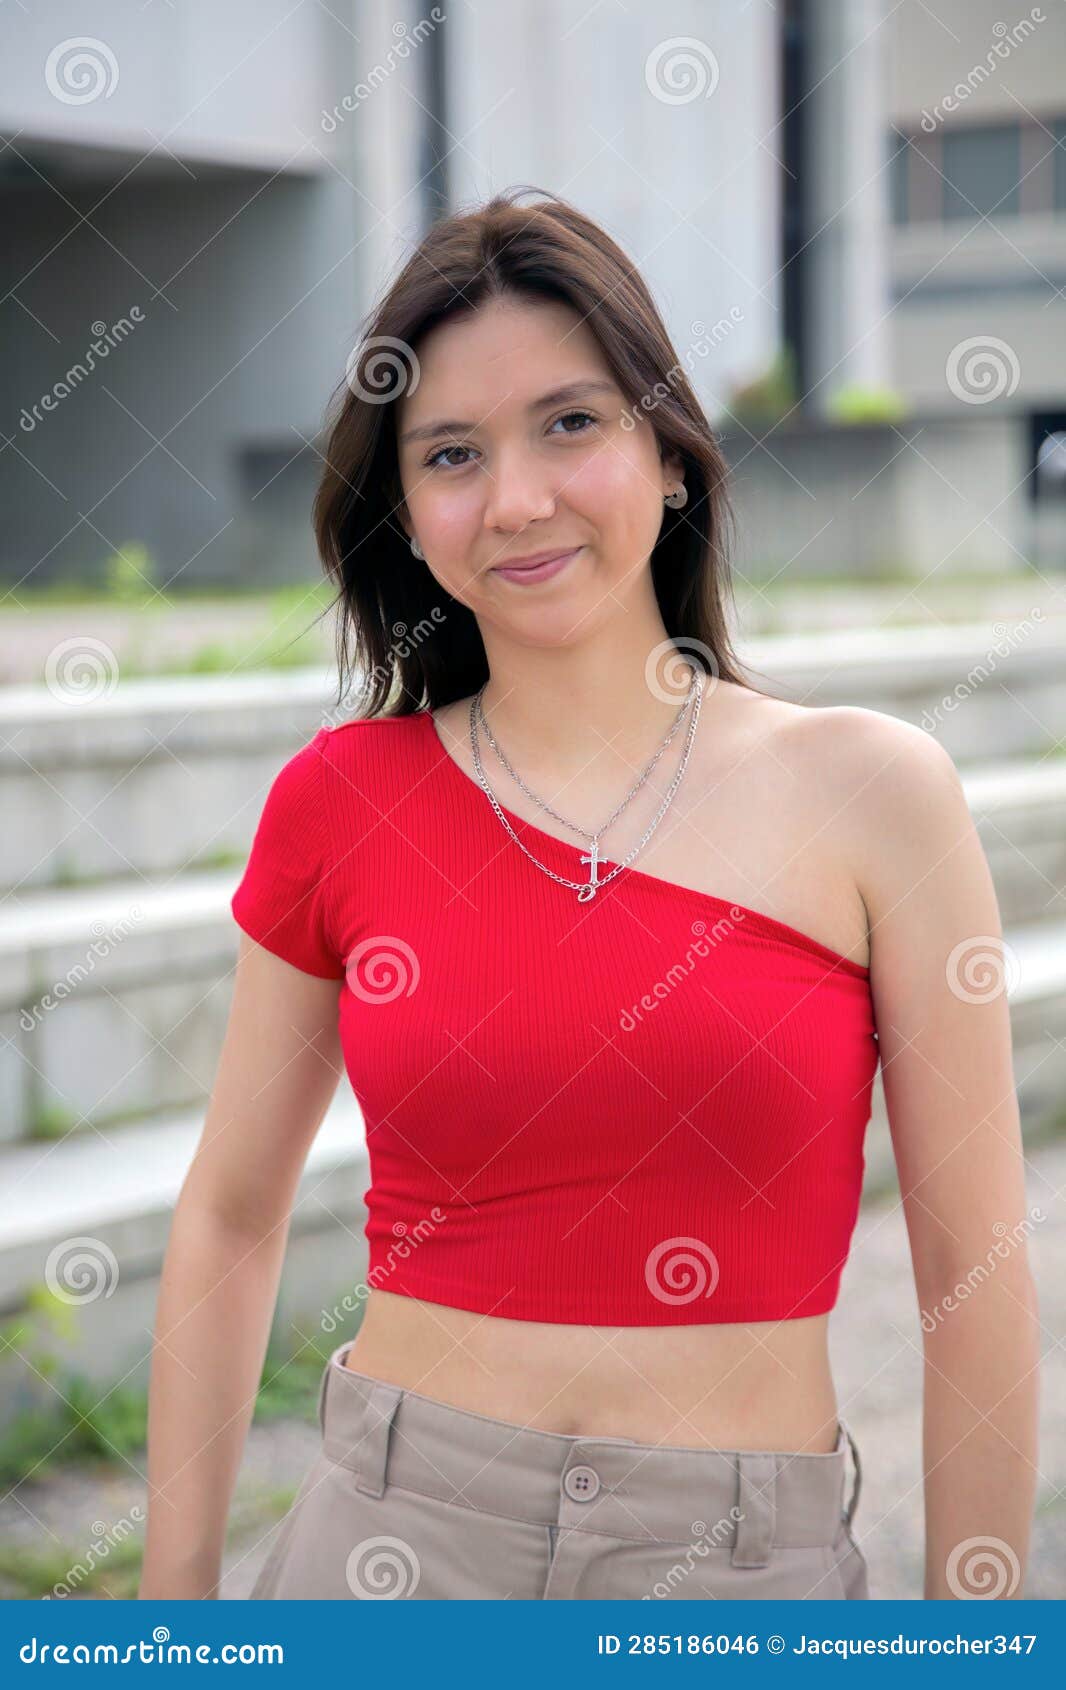 Woman Wearing a Red Top Camisole in the City during Summer Stock